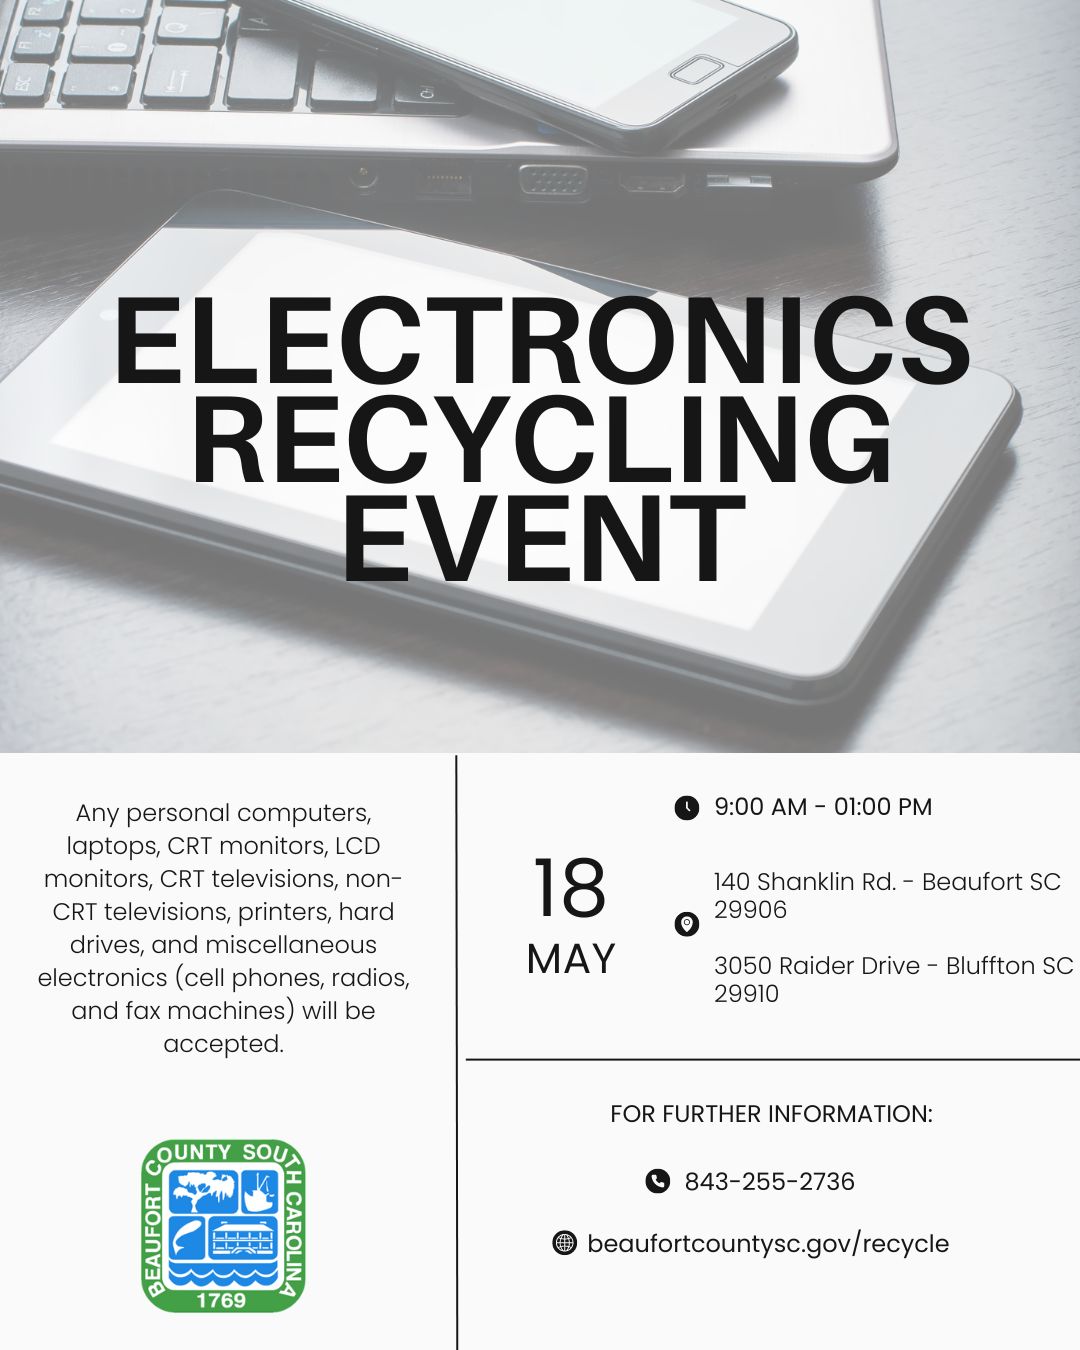 Beaufort County Offers Free Electronics Recycling Event Saturday, May 18